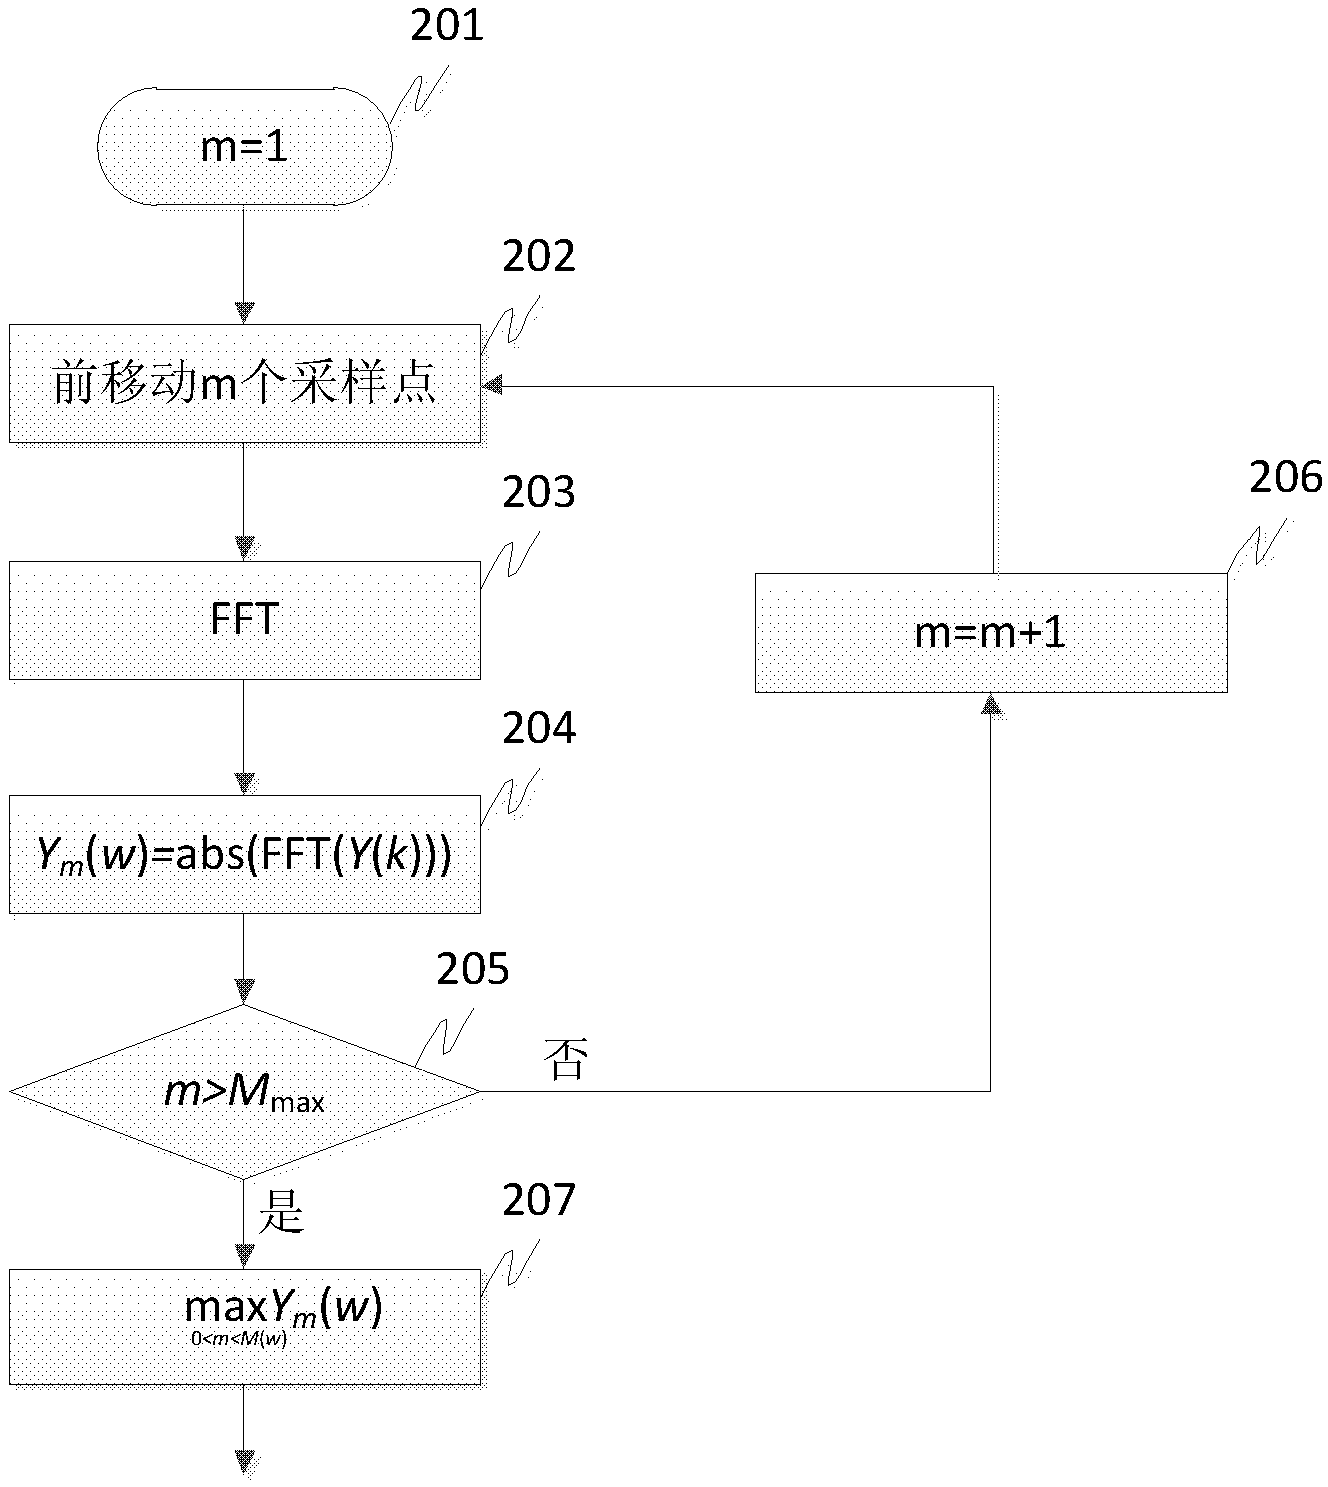 Speech enhancement method of multi-sub-band spectral subtraction based on phase adjustment and amplitude compensation